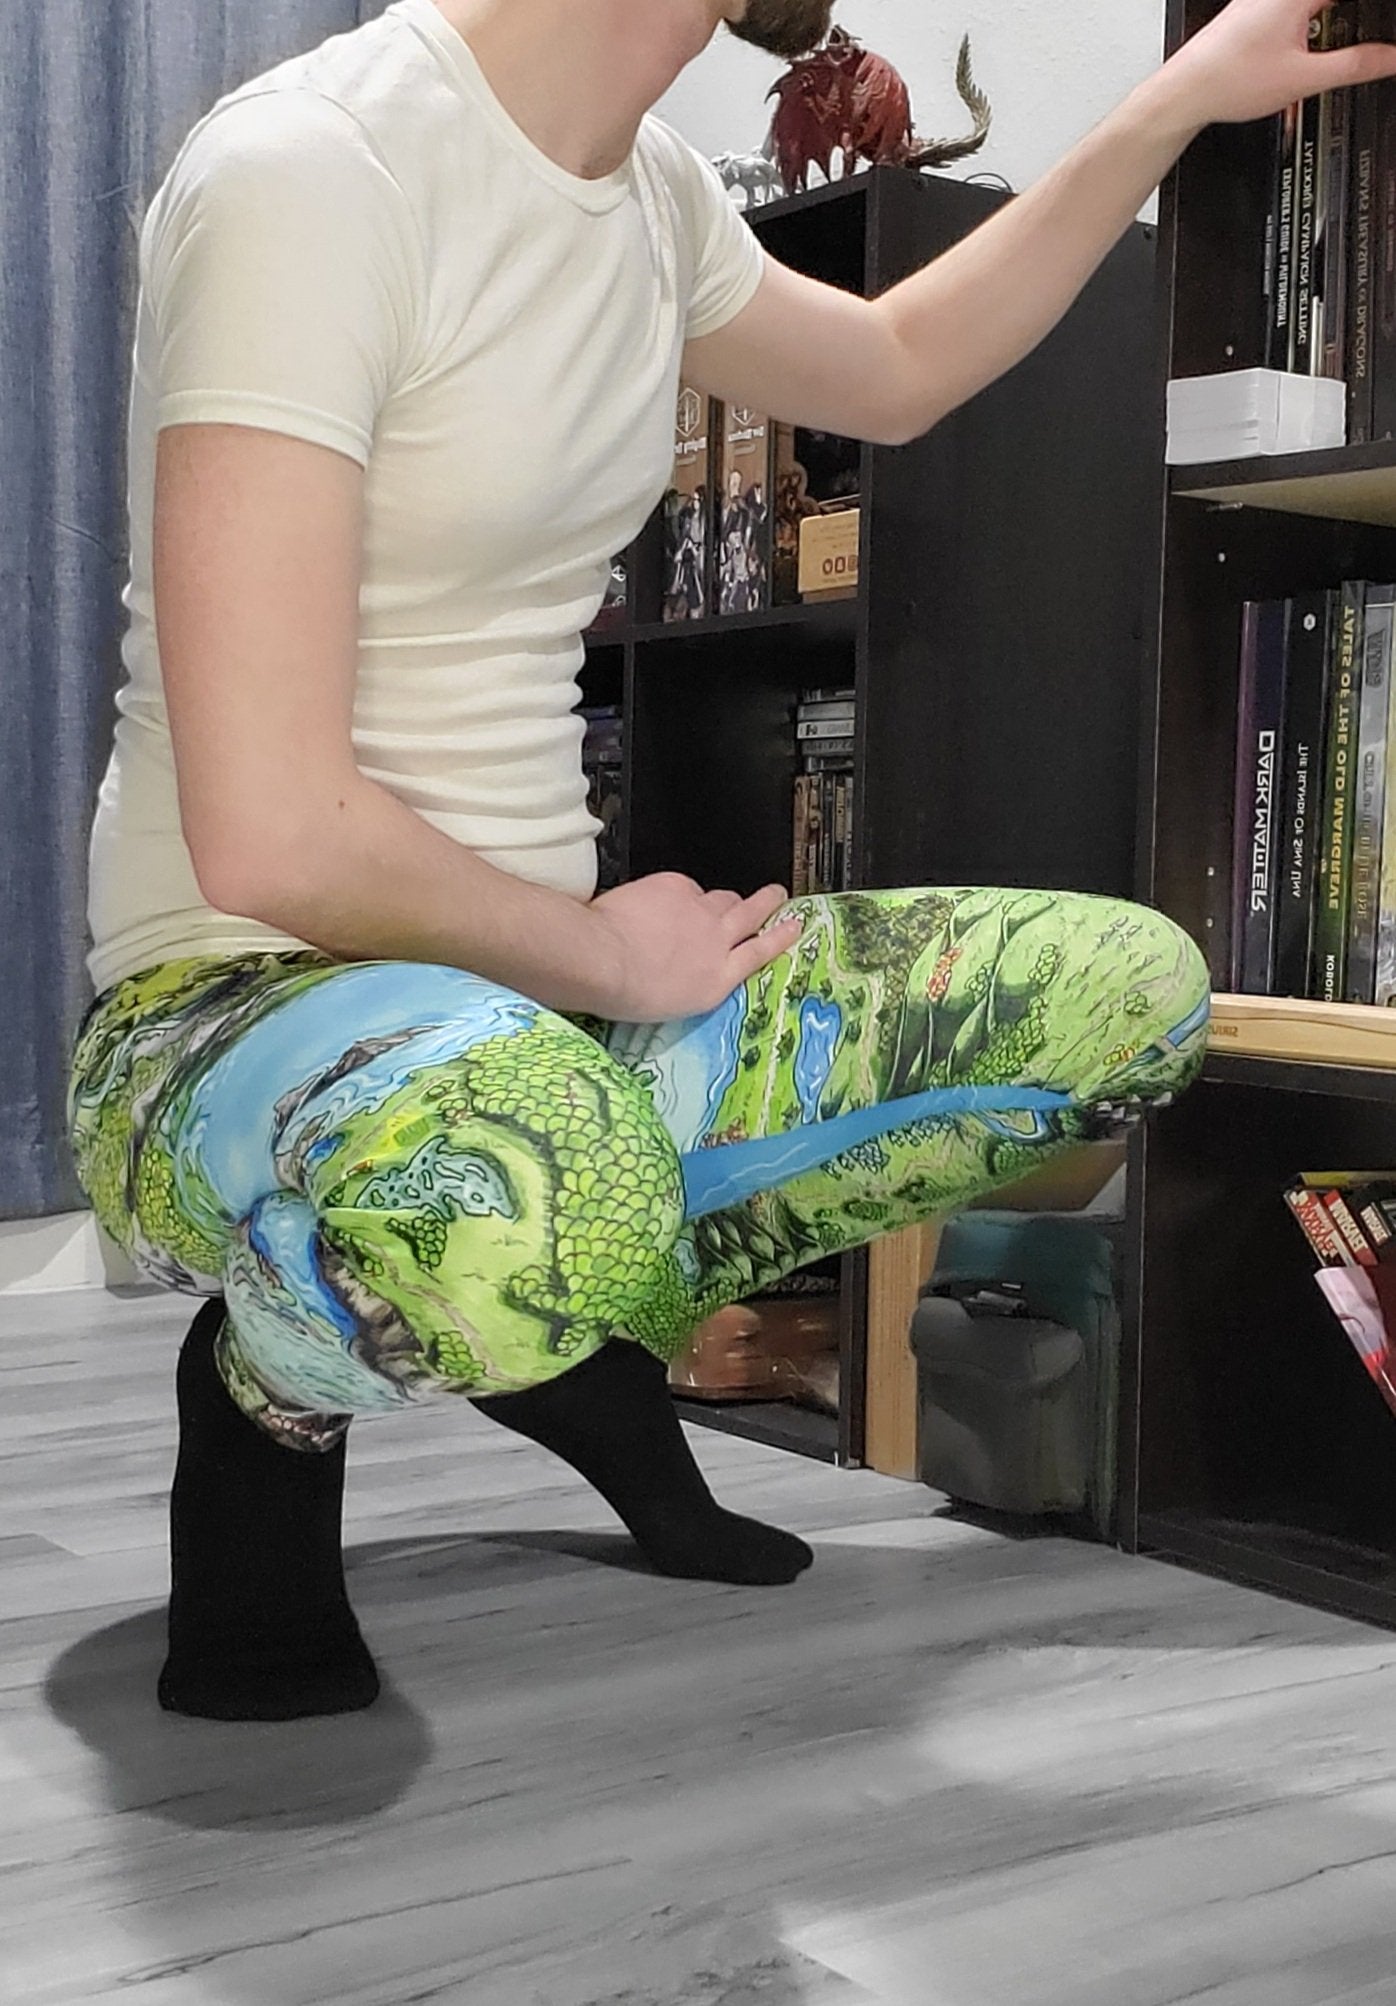 Josh Simons searches his bookshelf while crouching down in his Taur'Syldor map leggings by Deven Rue.